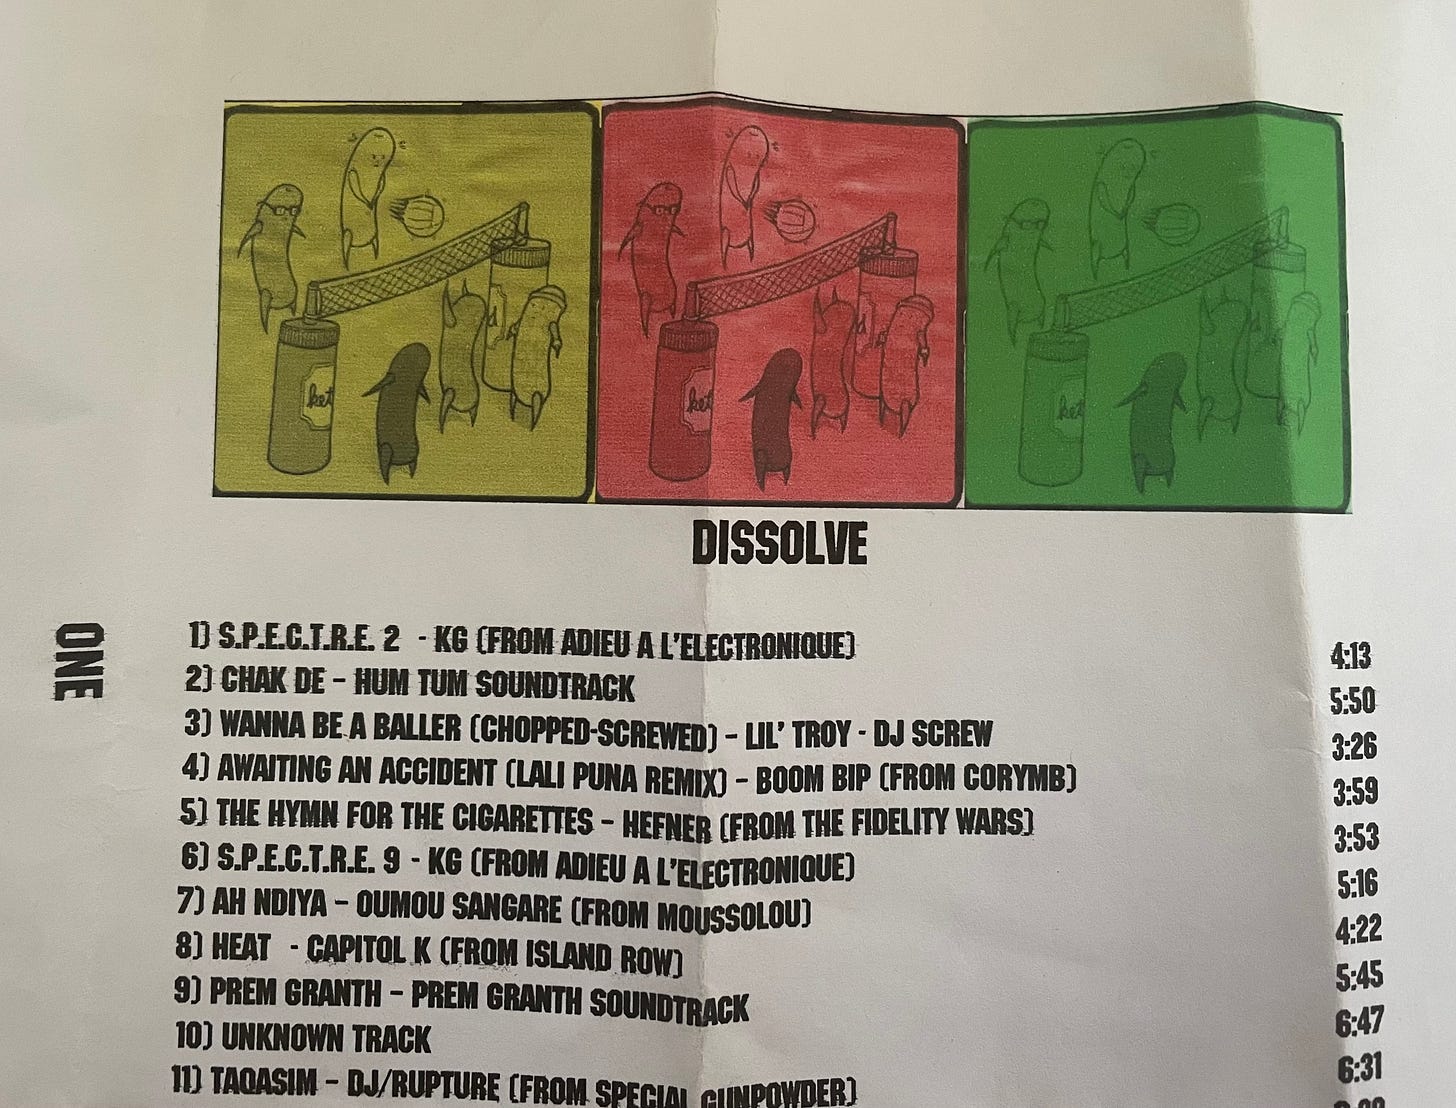 "Dissolve" CD cover with image of hot dogs playing volleyball with track listings